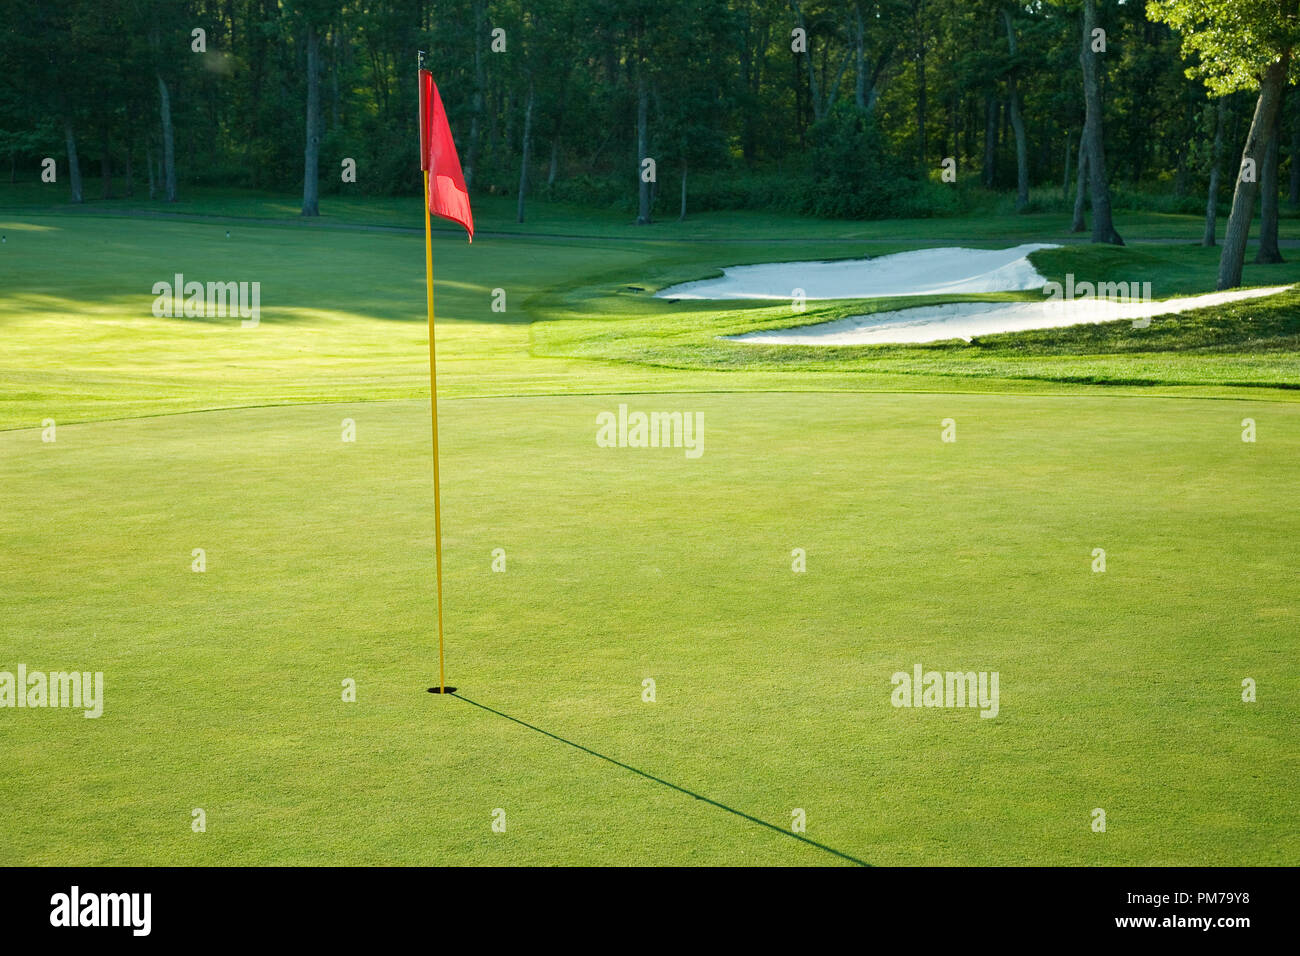 Golf green with red flag bordered by white sand traps and trees in late afternoon sun Stock Photo